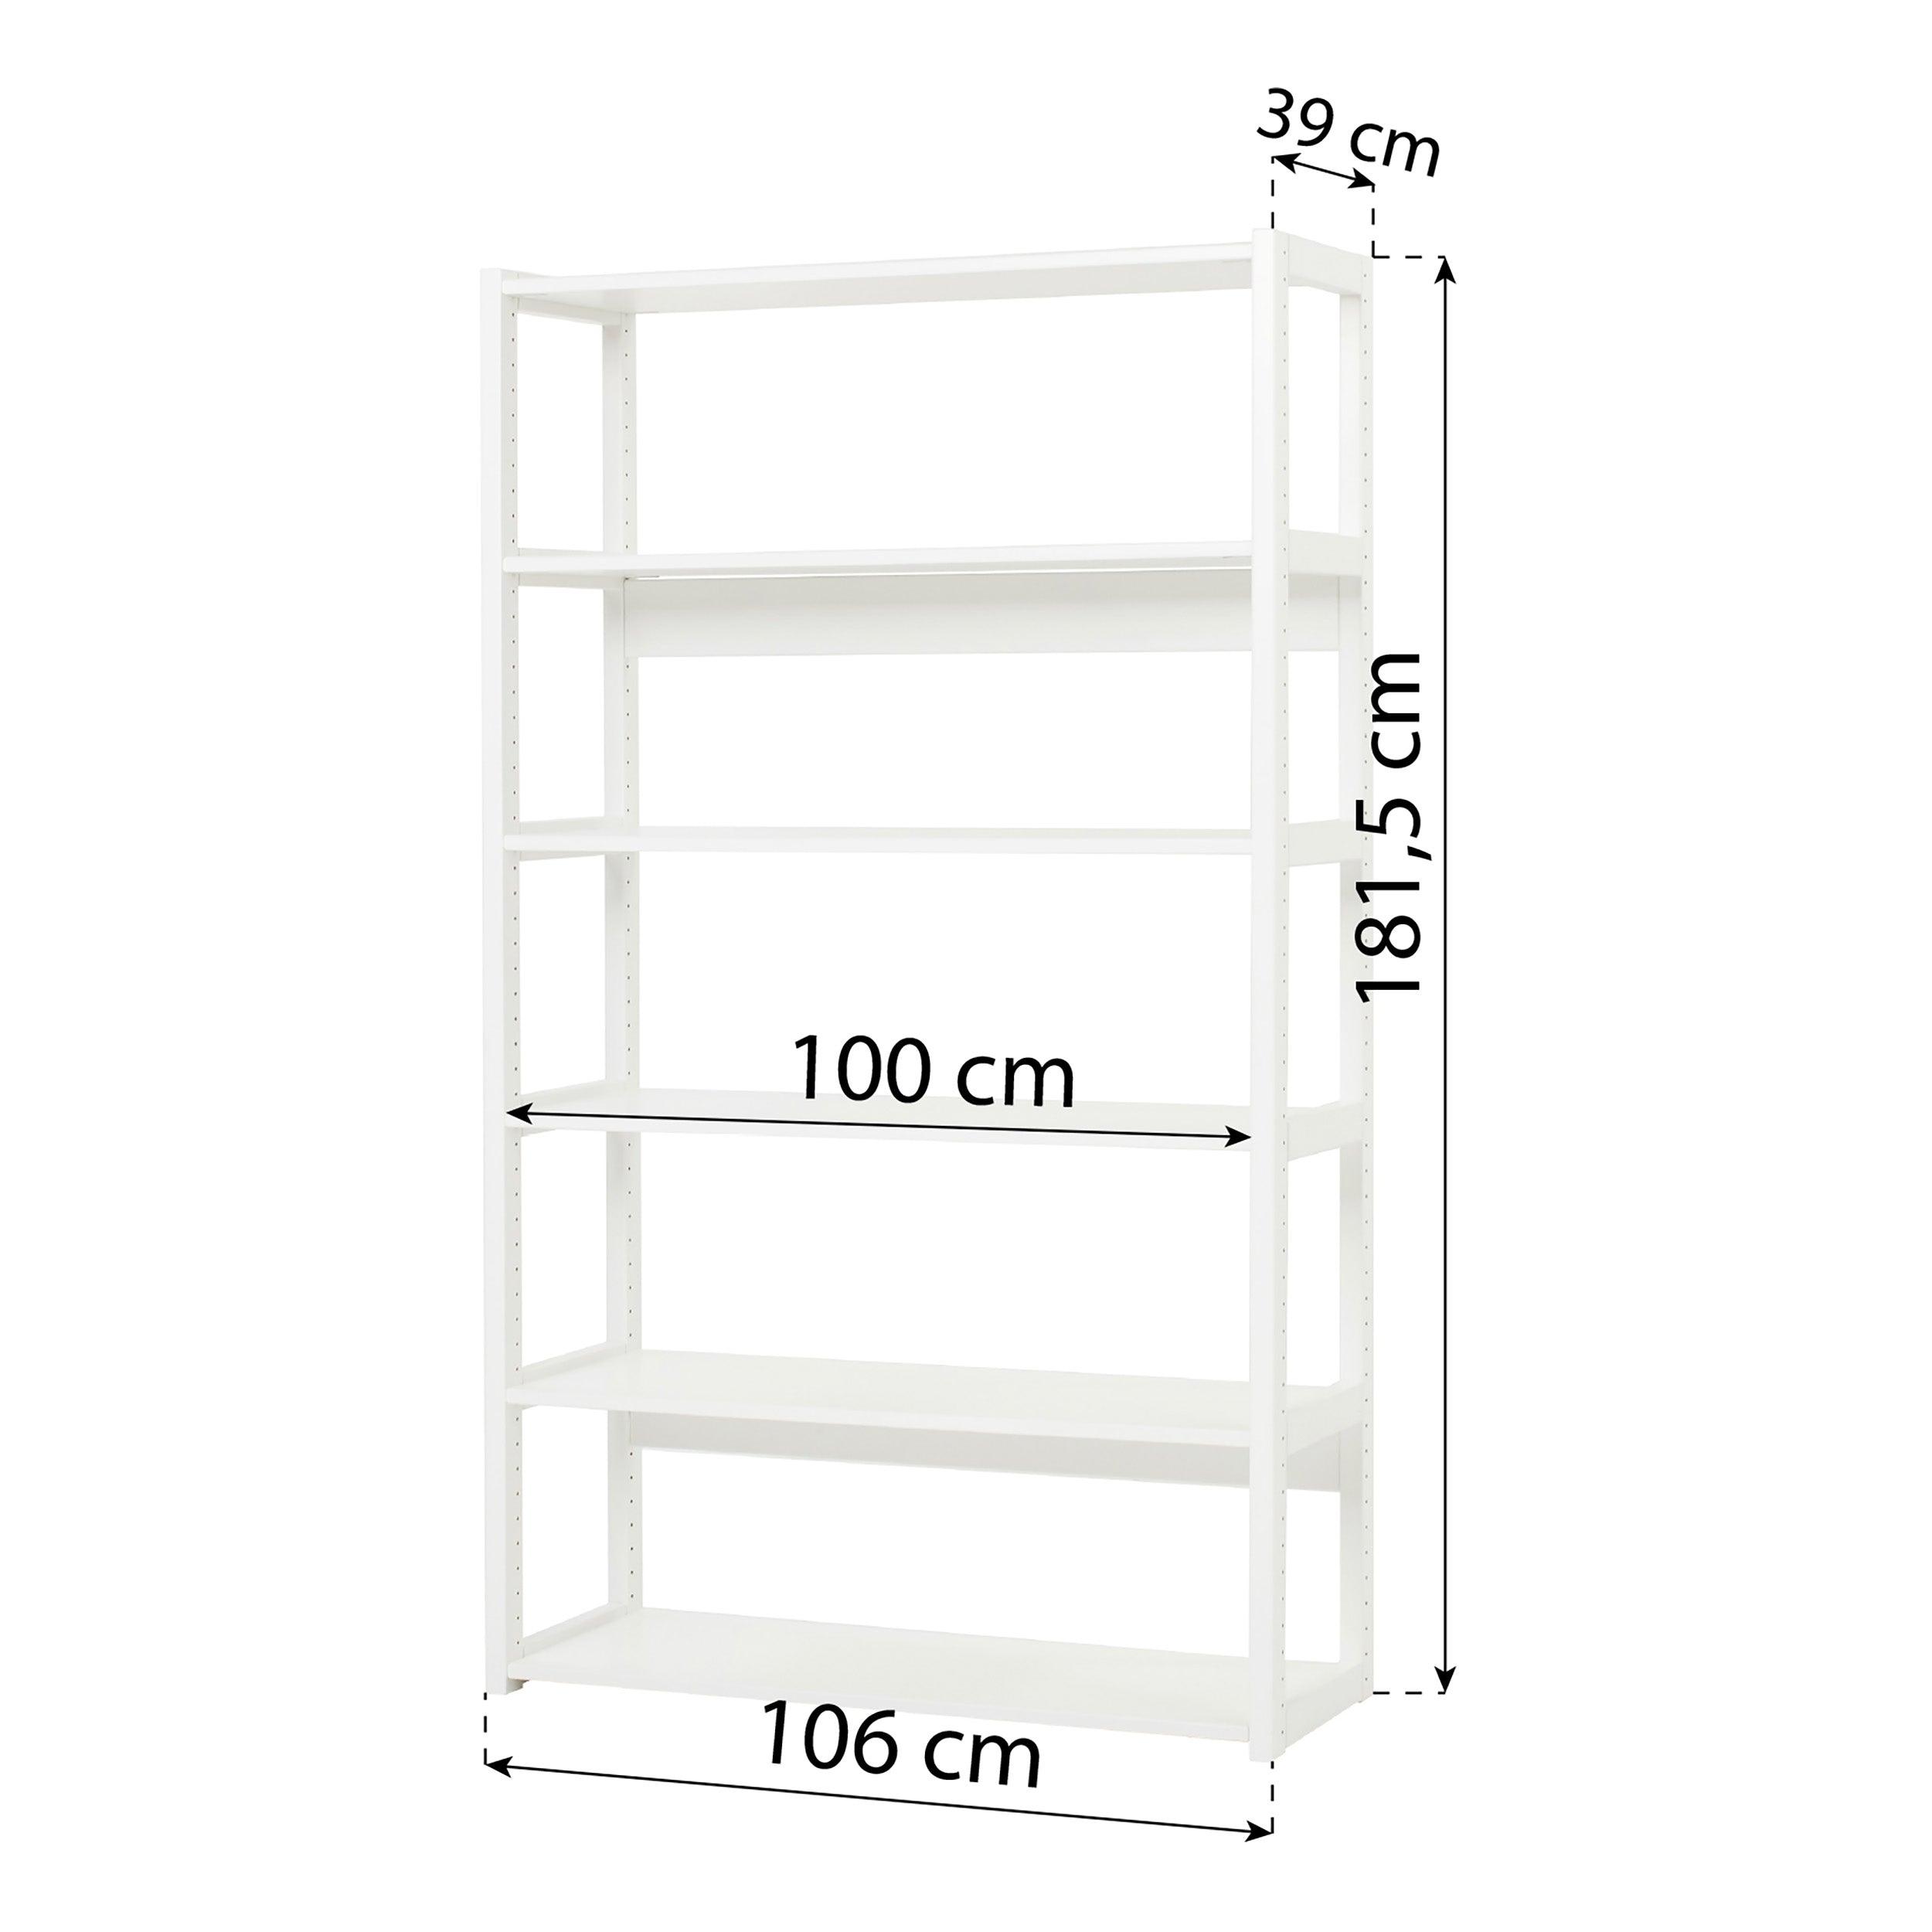 Hoppekids STOREY section with 6 shelves